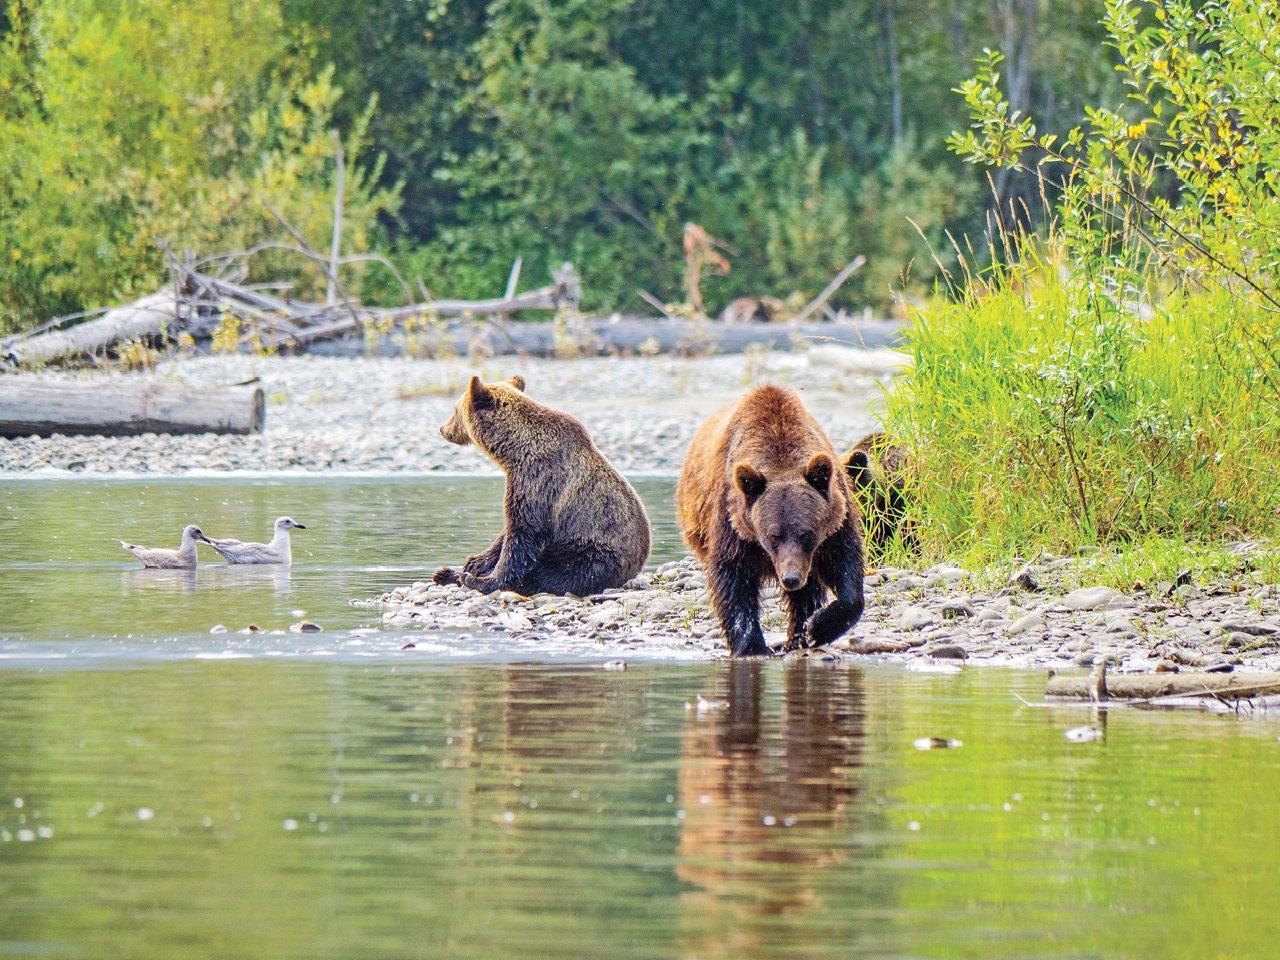 A photo of two grizzly bears on the shore of a river